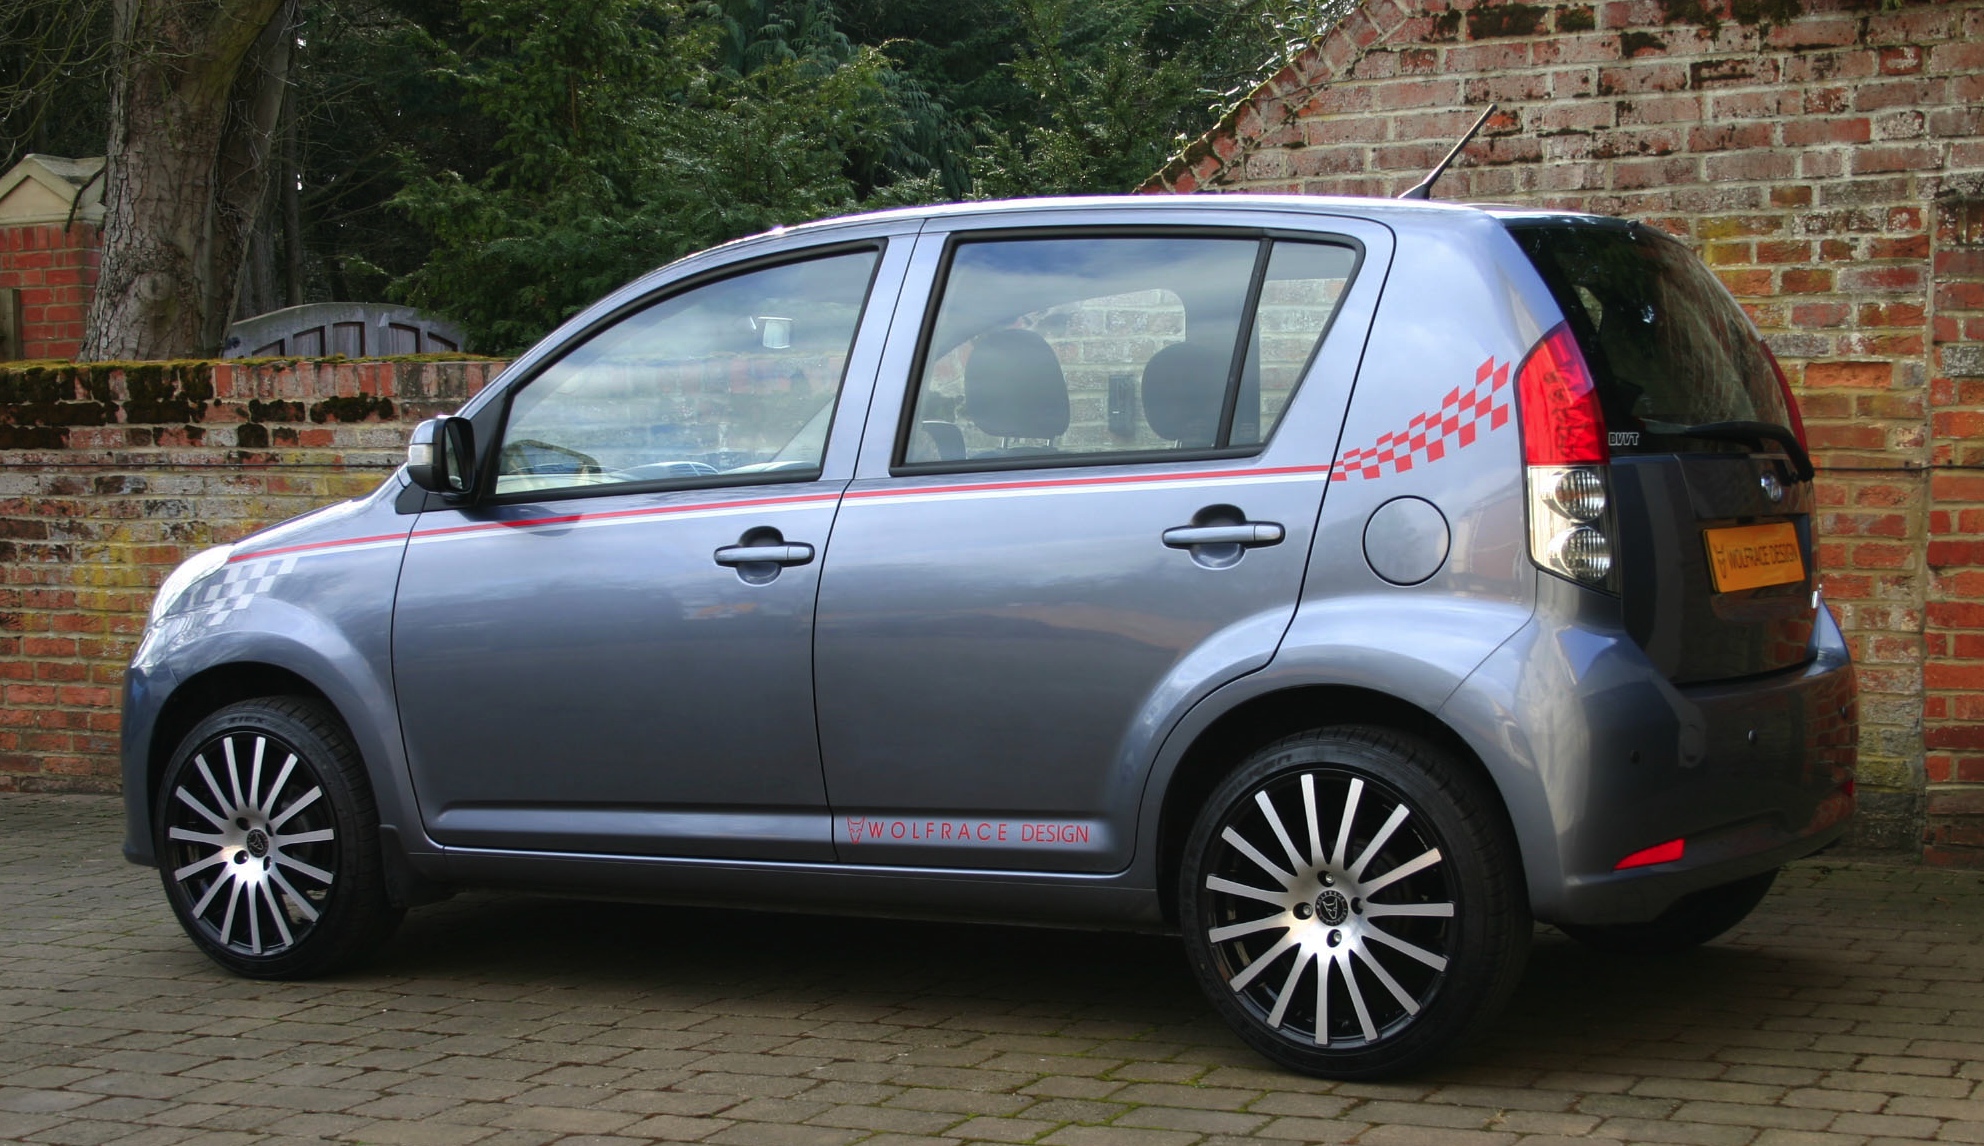 New Perodua Limited Edition Myvis Introduced in the UK 